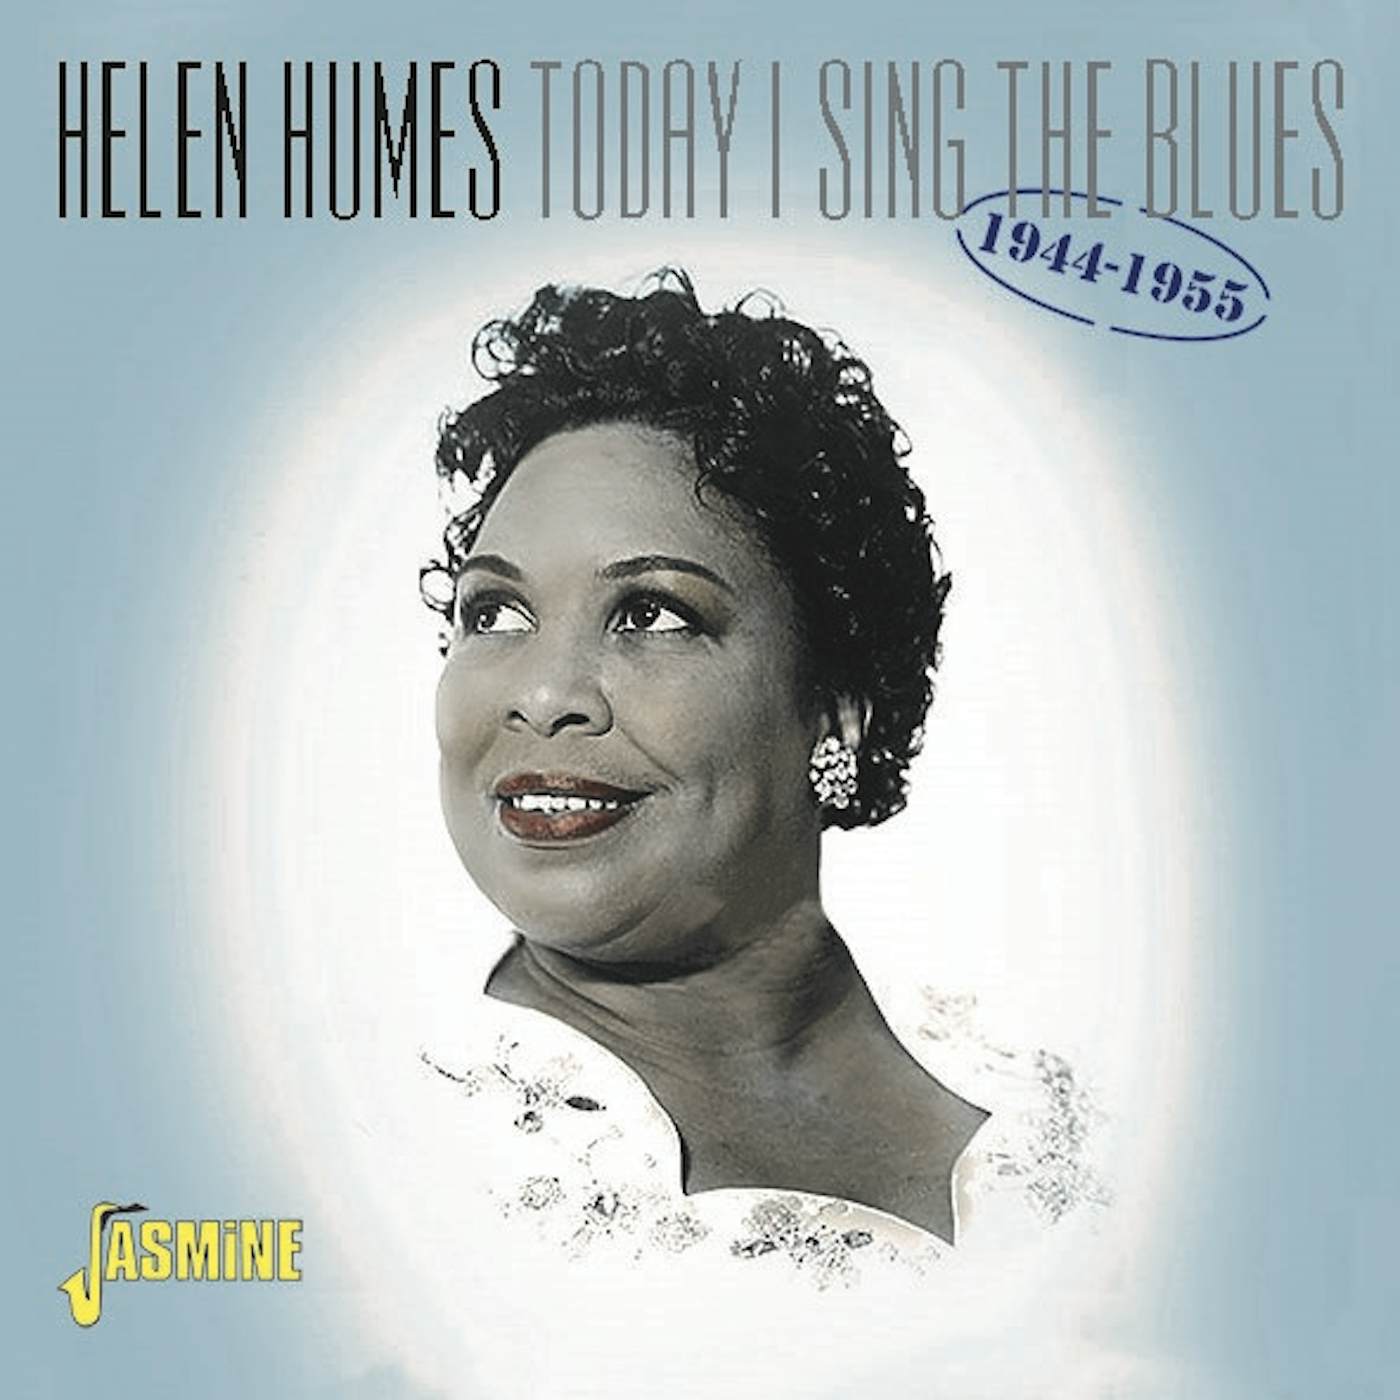 Helen Humes TODAY I SING THE BLUES 1944-1955 CD